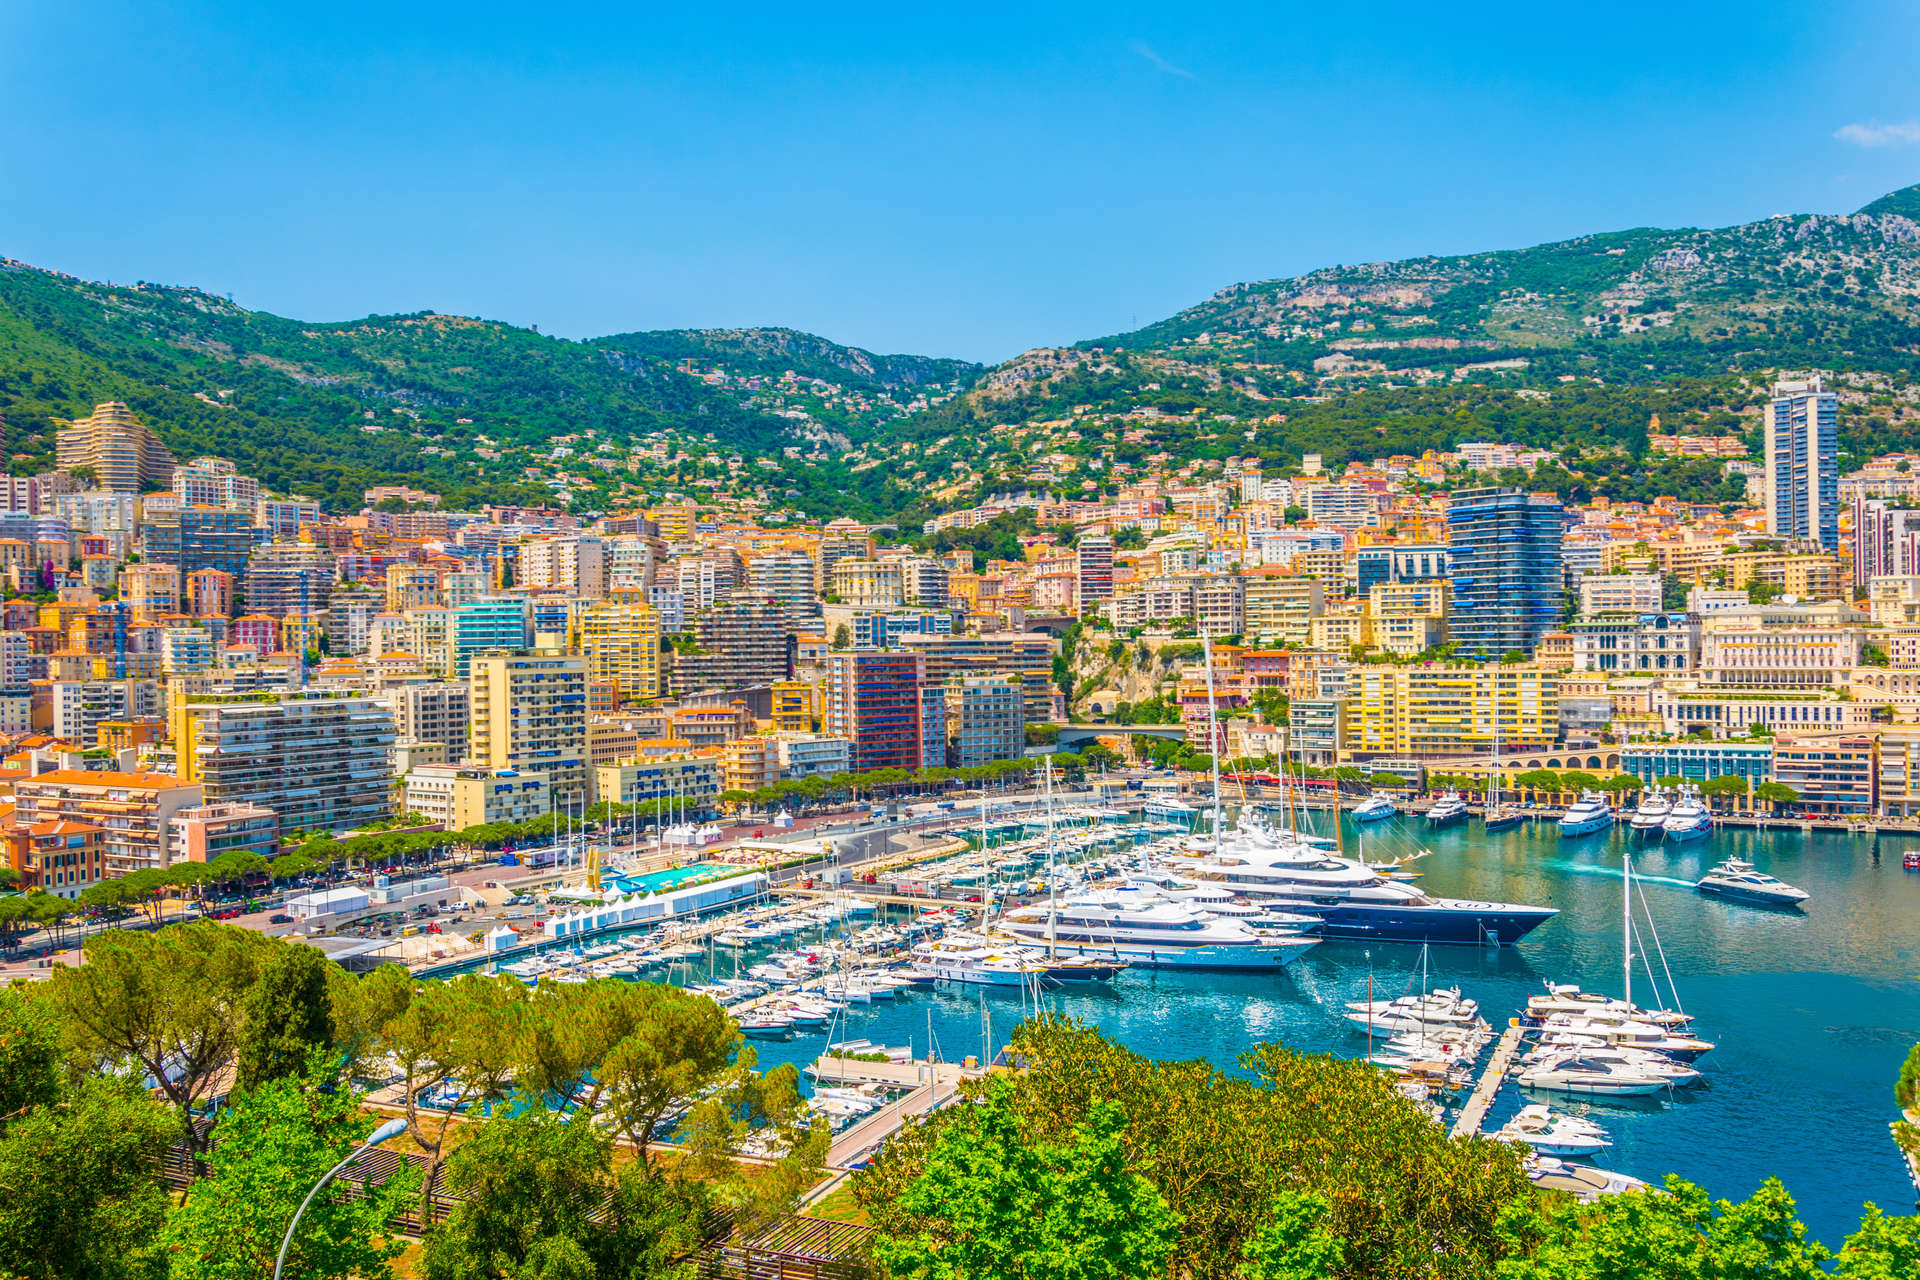 Port Hercule is where the world’s high-rollers moor their superyachts when they sail into town